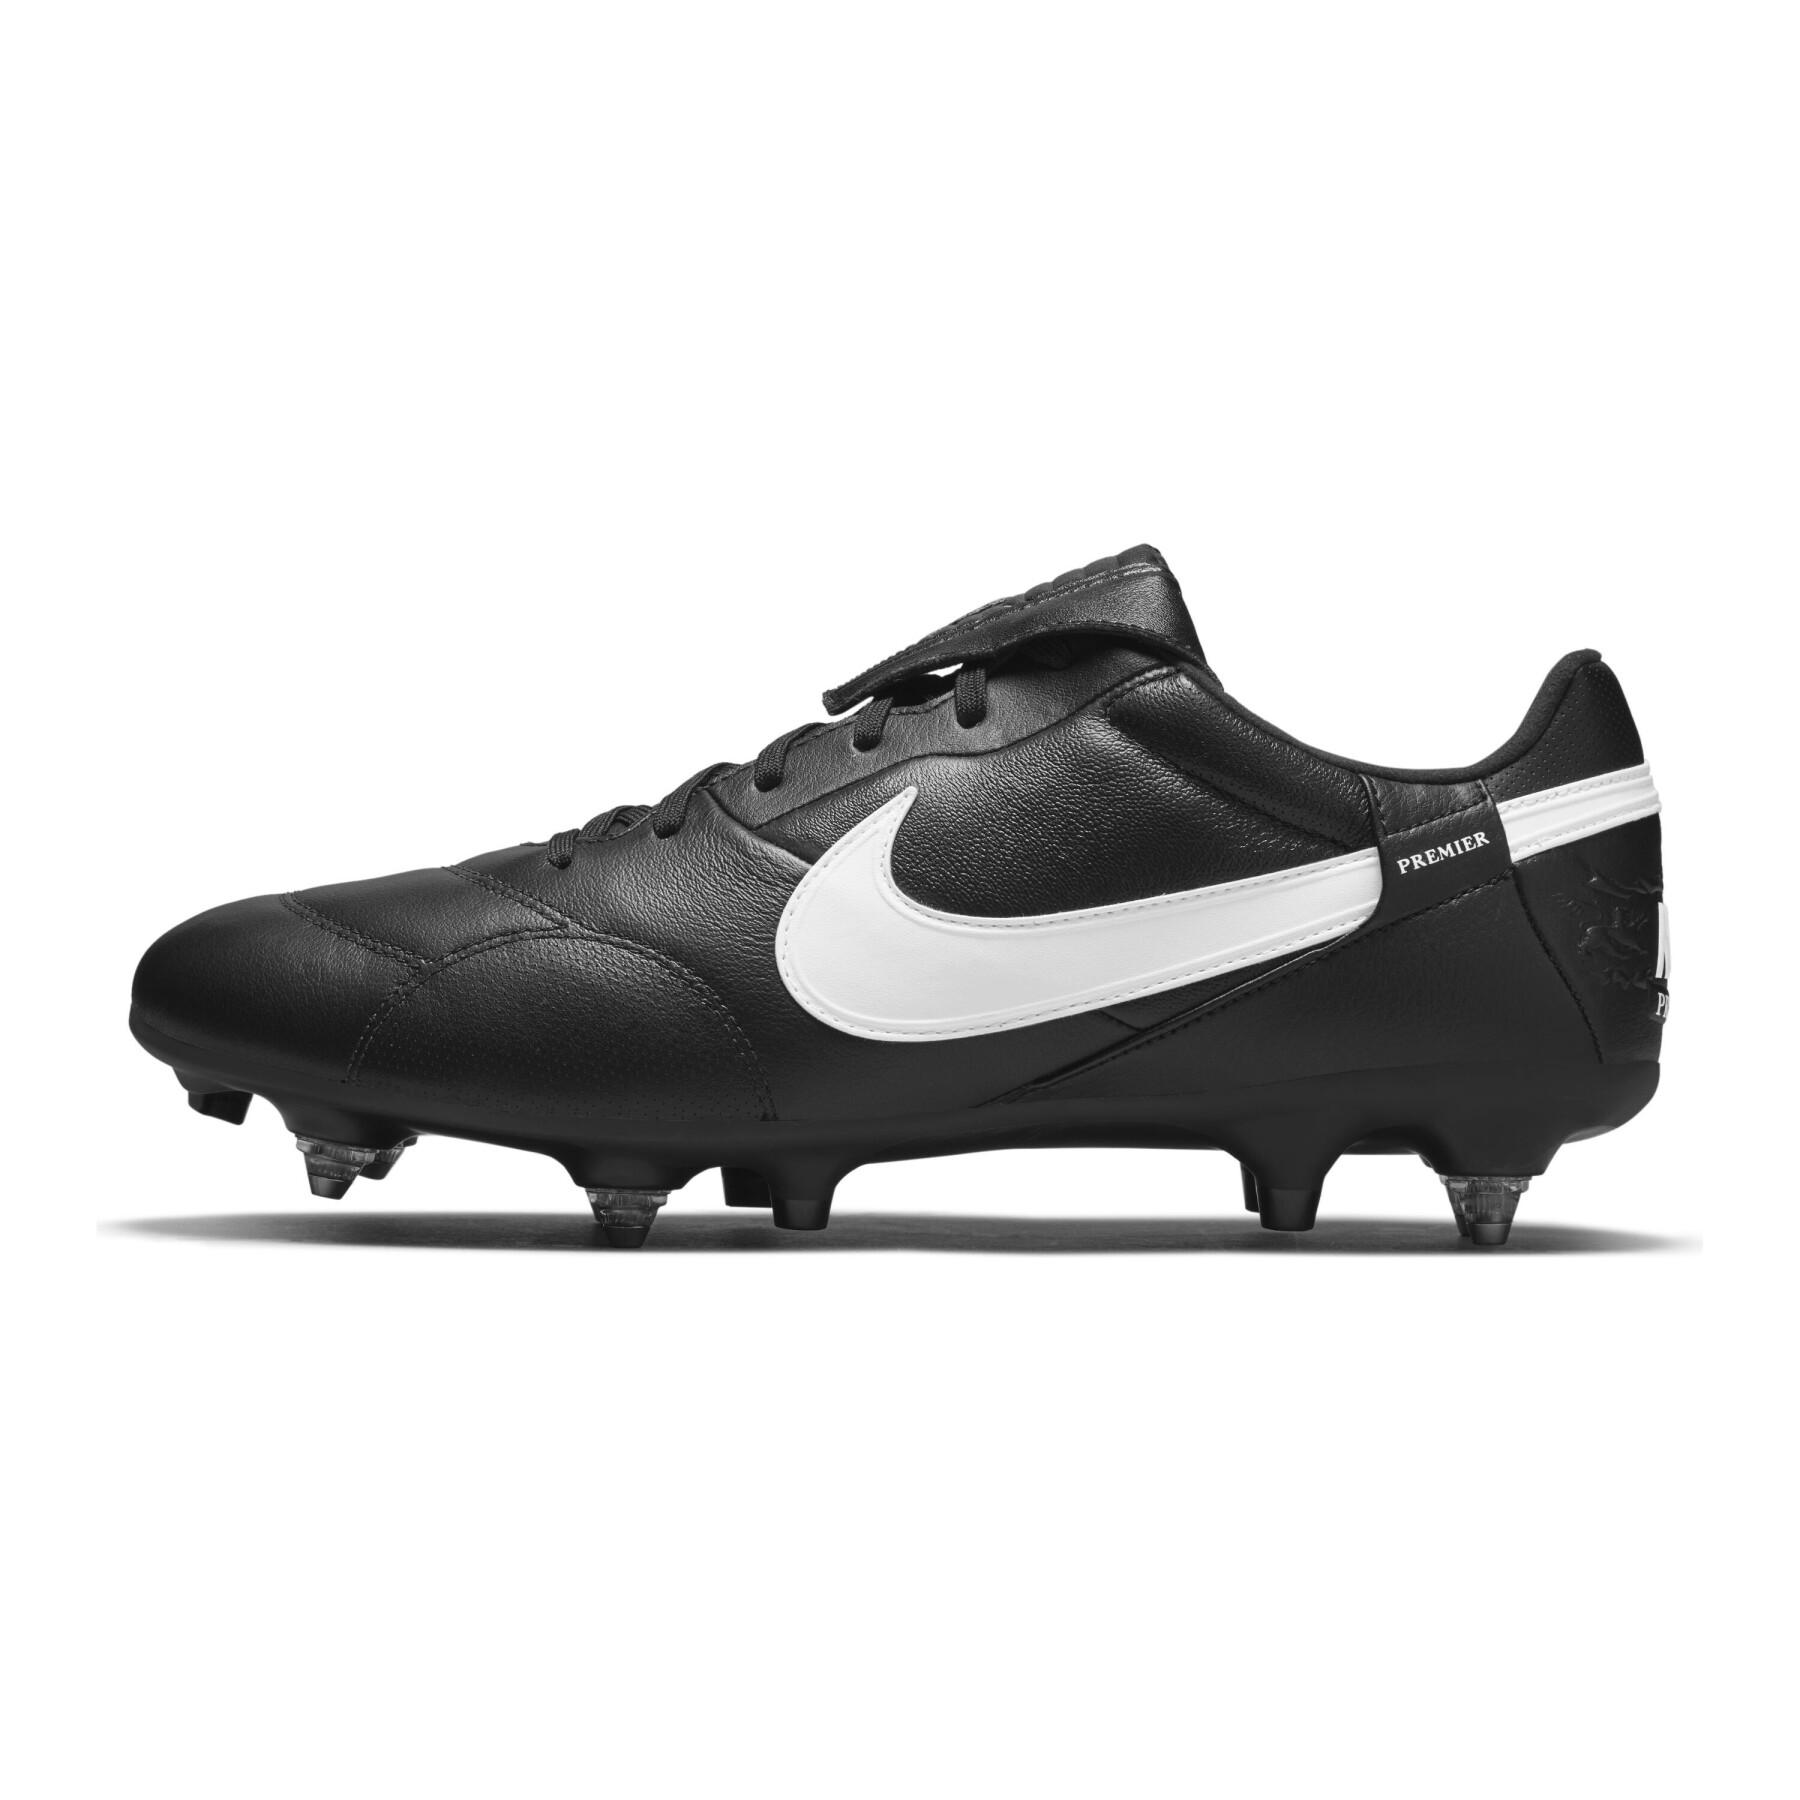 Chaussures de football Nike Premier 3 SG-Pro Anti-Clog Traction